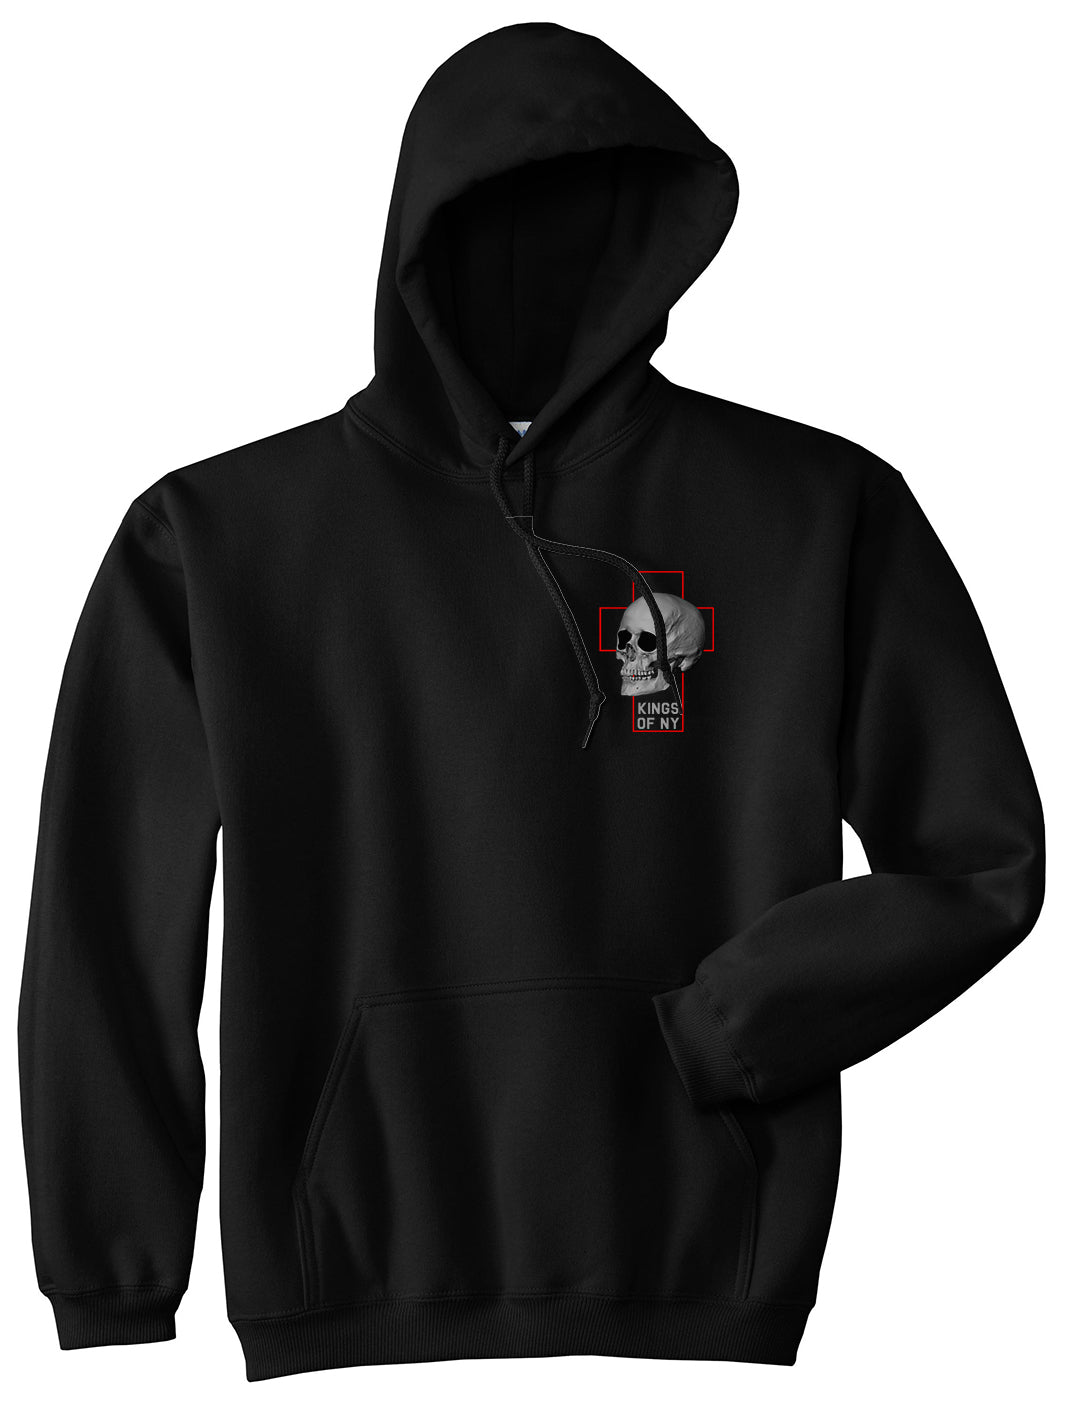 Cross And Skull Chest Mens Pullover Hoodie Black by Kings Of NY